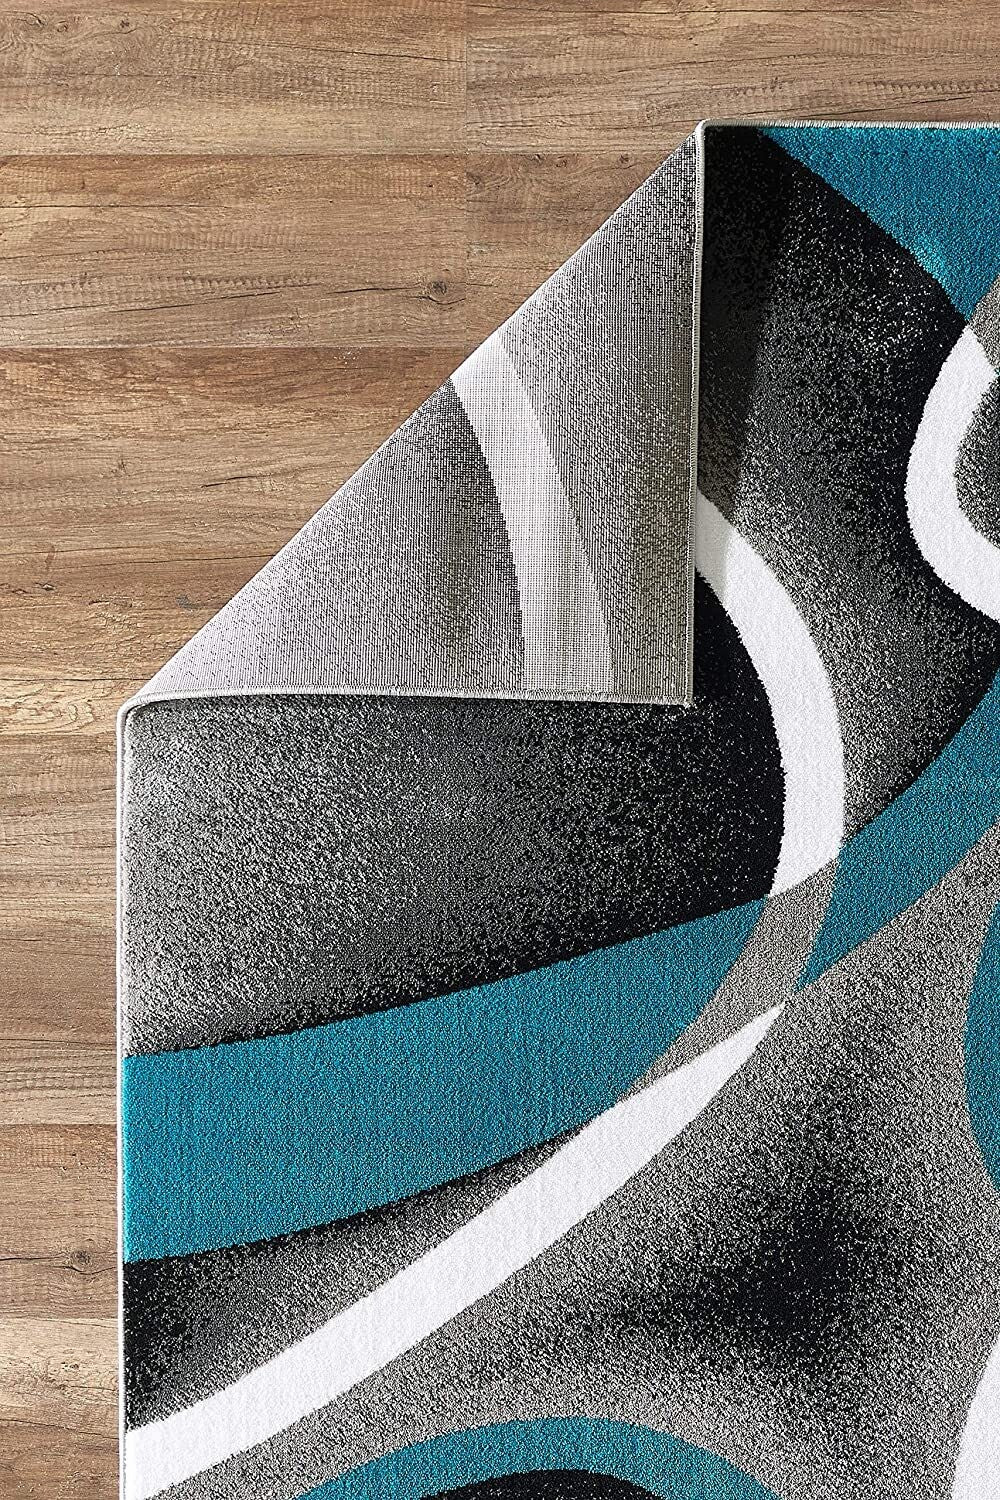 Sevilla Collection Swirls Turquoise Light Grey Rug Carpet Bedroom Living Room Accent (4816)